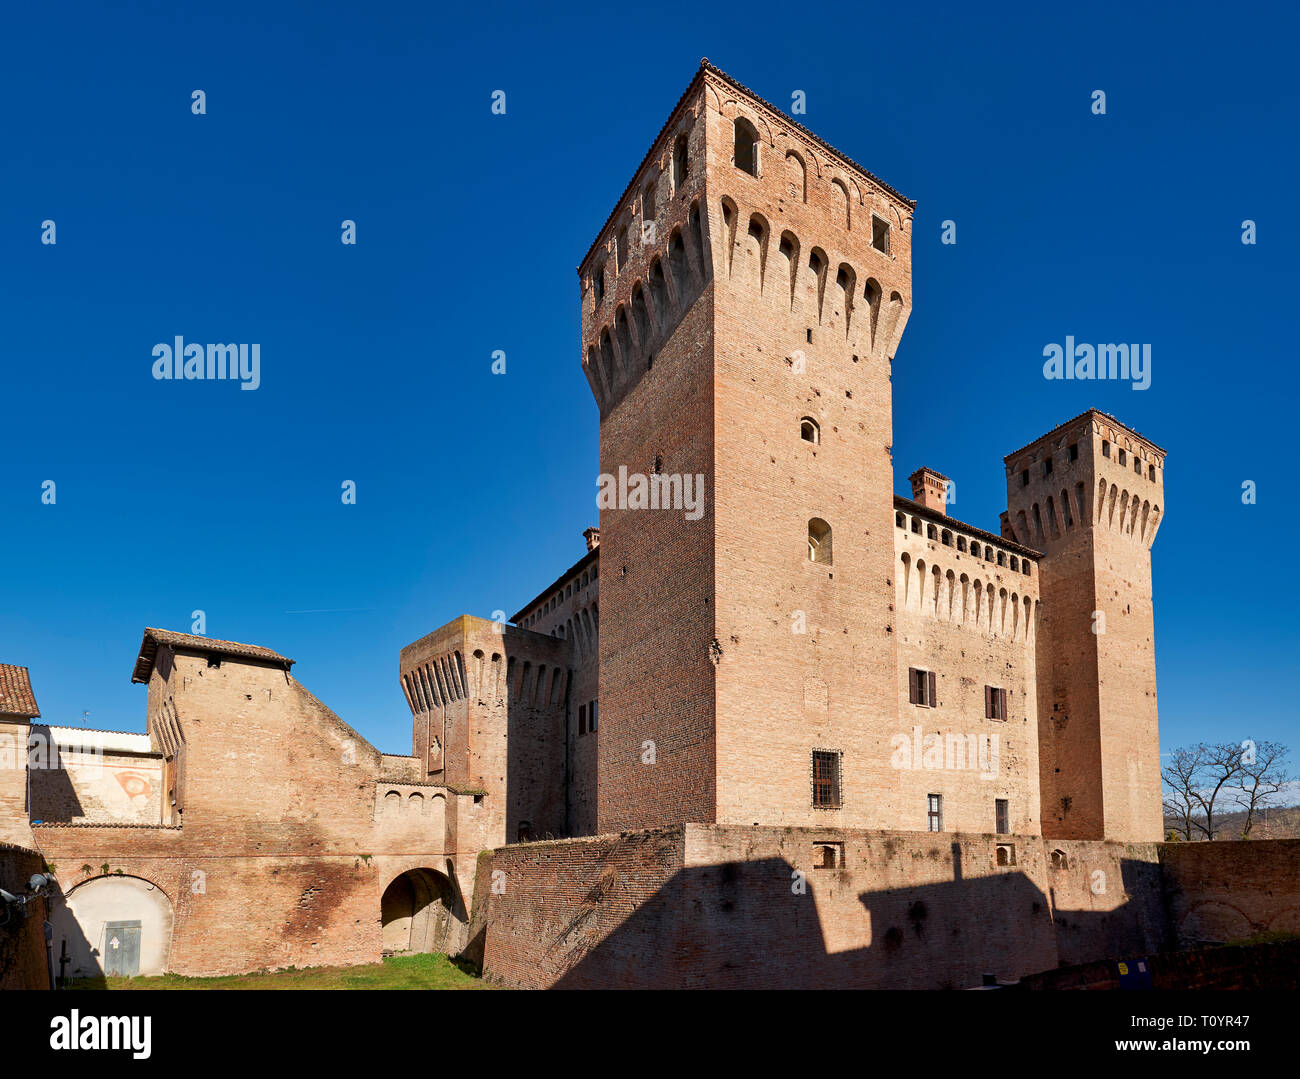 Vignola, Modena, Emilia Romagna, Italy. The Castle (Rocca), built in the Carolingian era but known from 1178; it was turned into a patrician residence Stock Photo